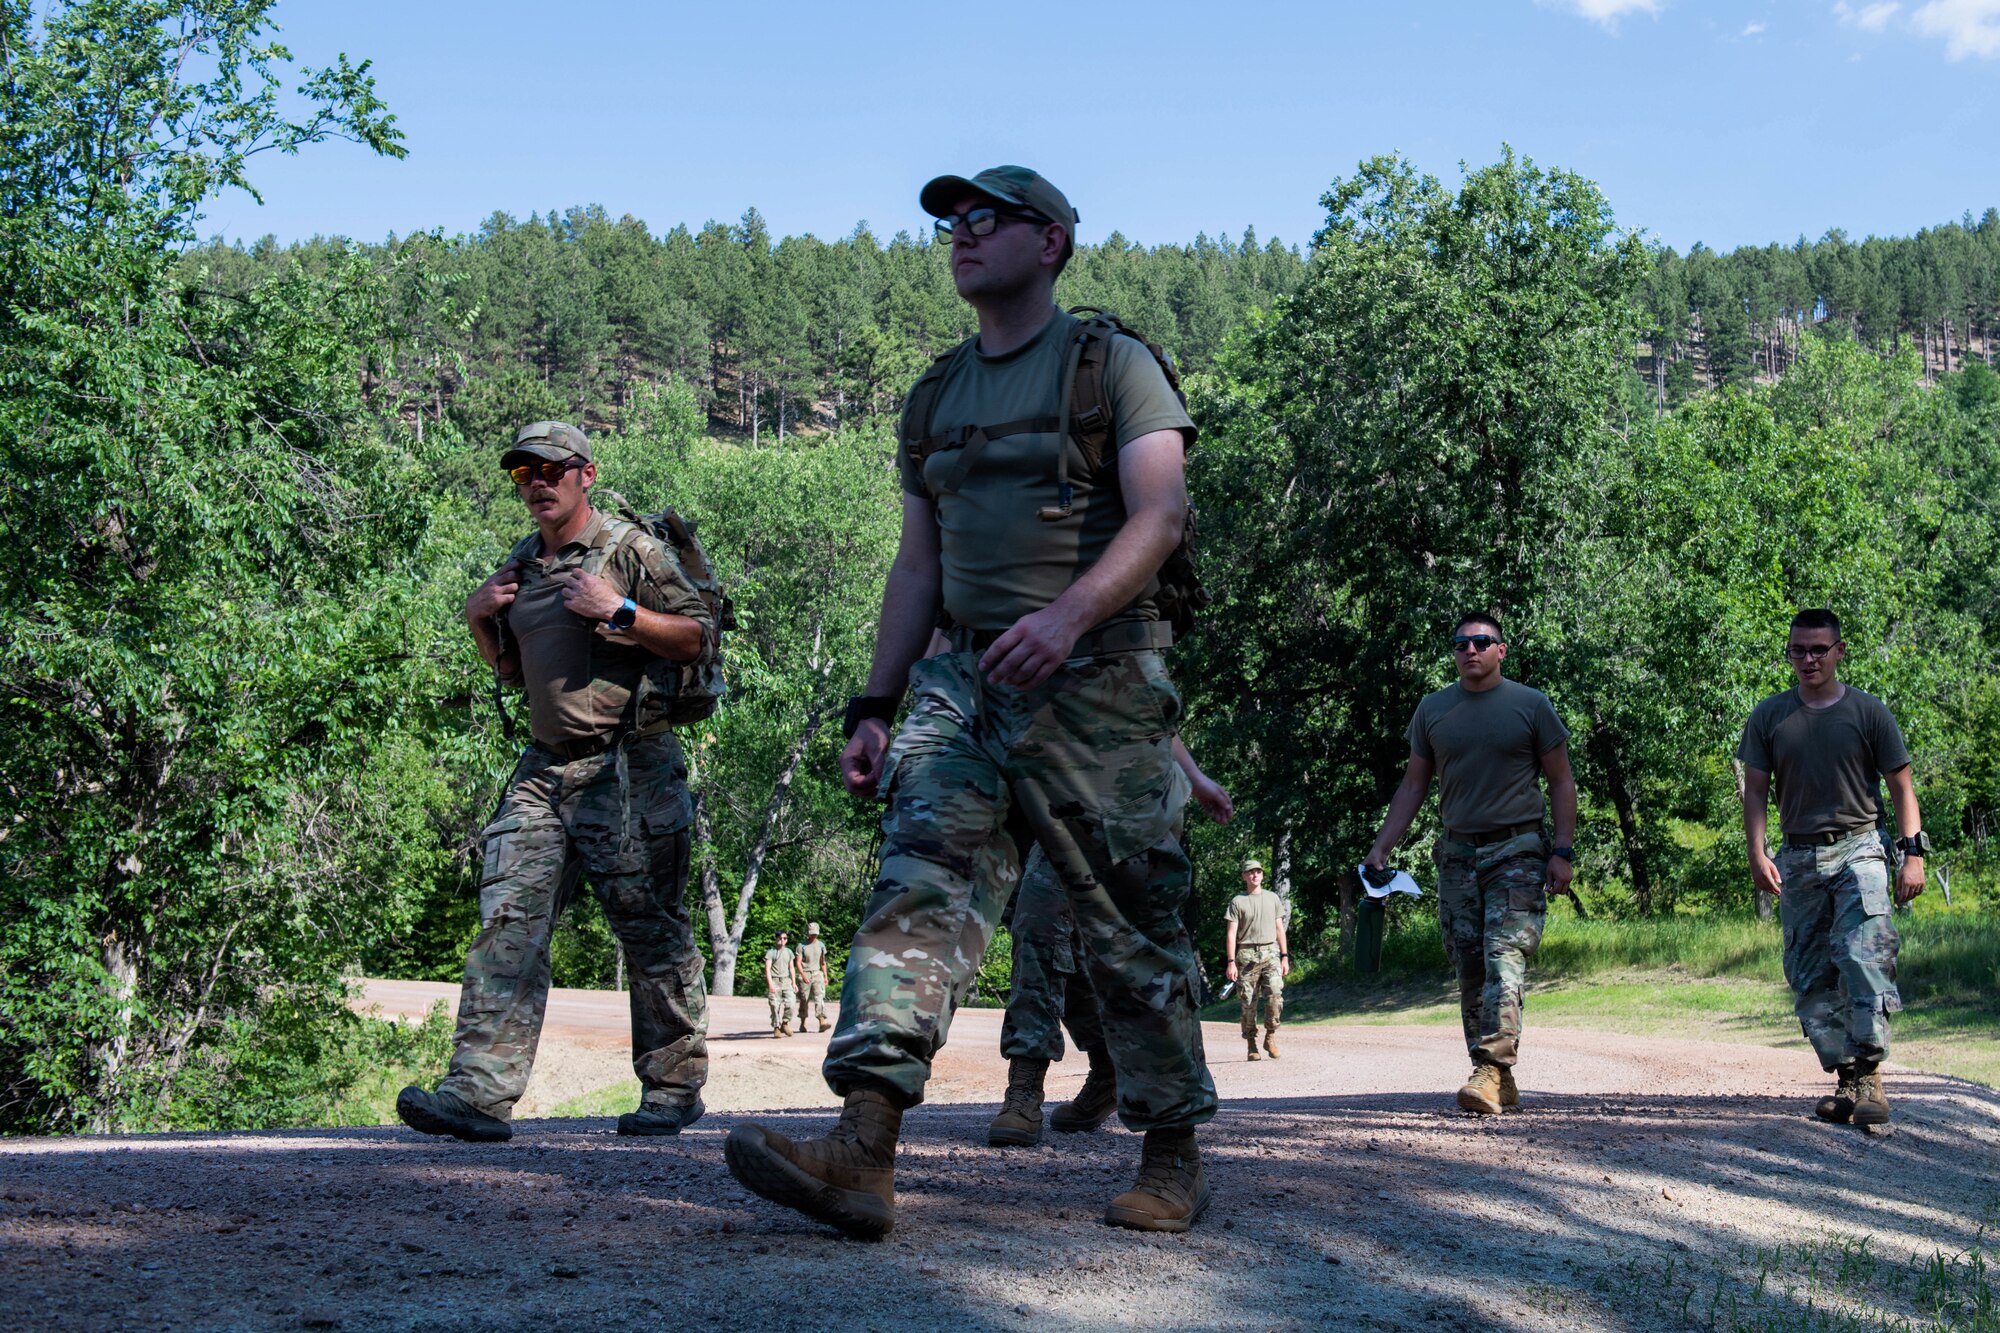 U.S. Air Force Airmen, assigned to the 28th Bomb Wing, complete the last-leg of a navigation hike during the first iteration of the Ellsworth Outdoor Survival Skills Course at the Fort Meade Training Area, S.D., July 21, 2022.